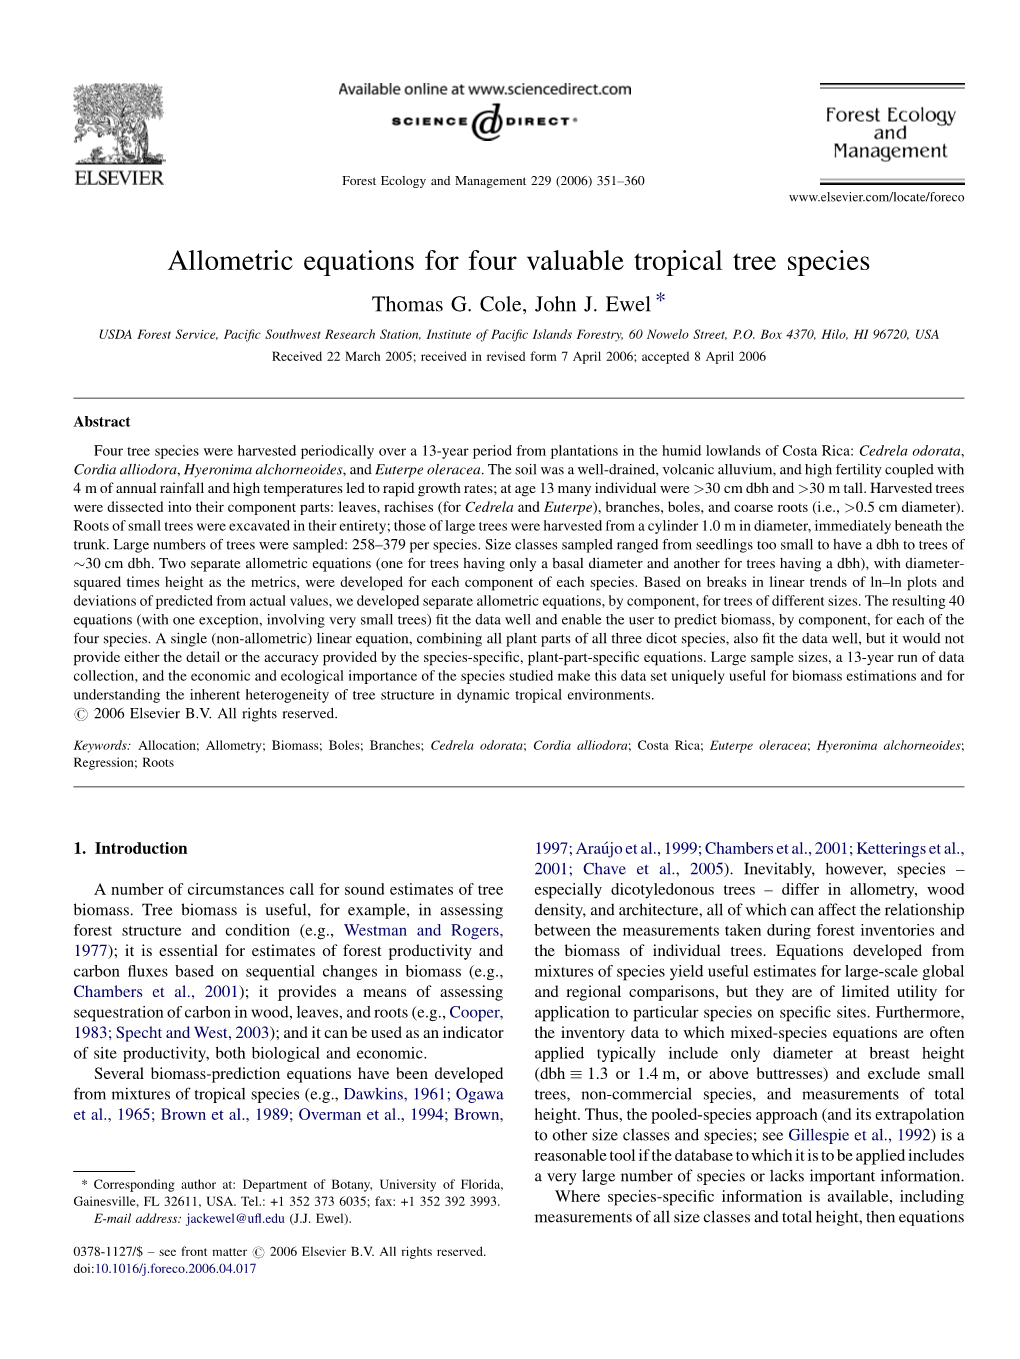 Allometric Equations for Four Valuable Tropical Tree Species Thomas G